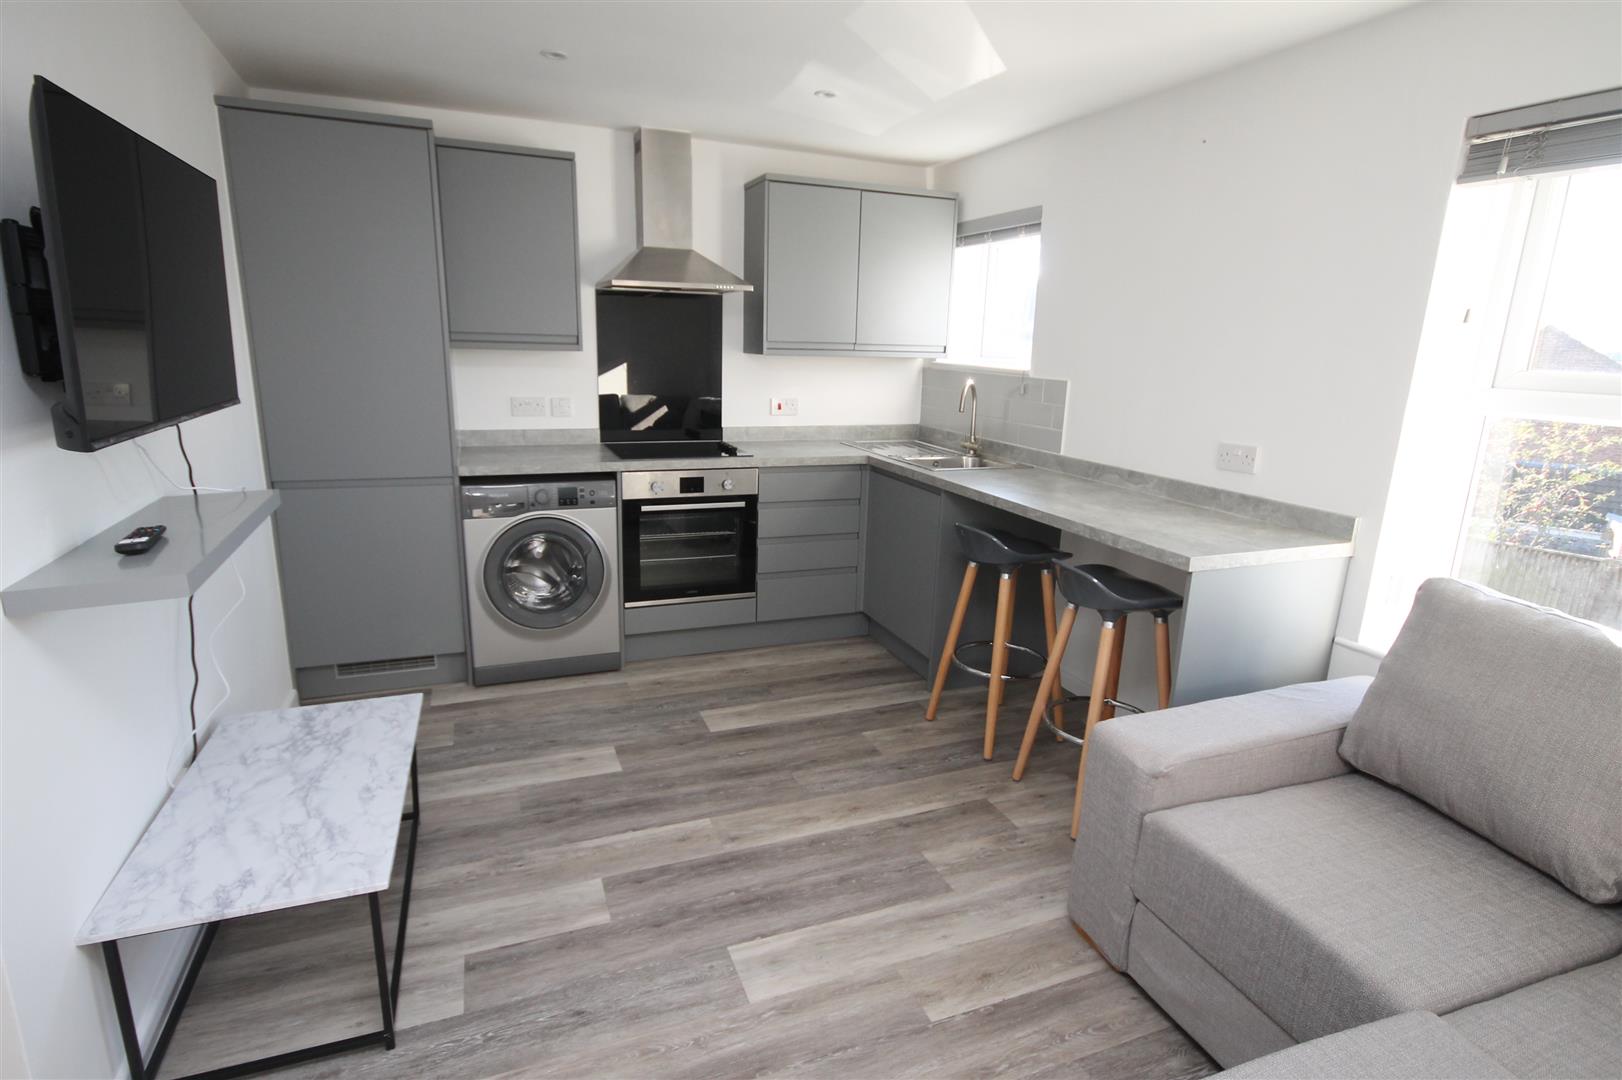 1 bed flat to rent in Park Hill, Bristol, BS11